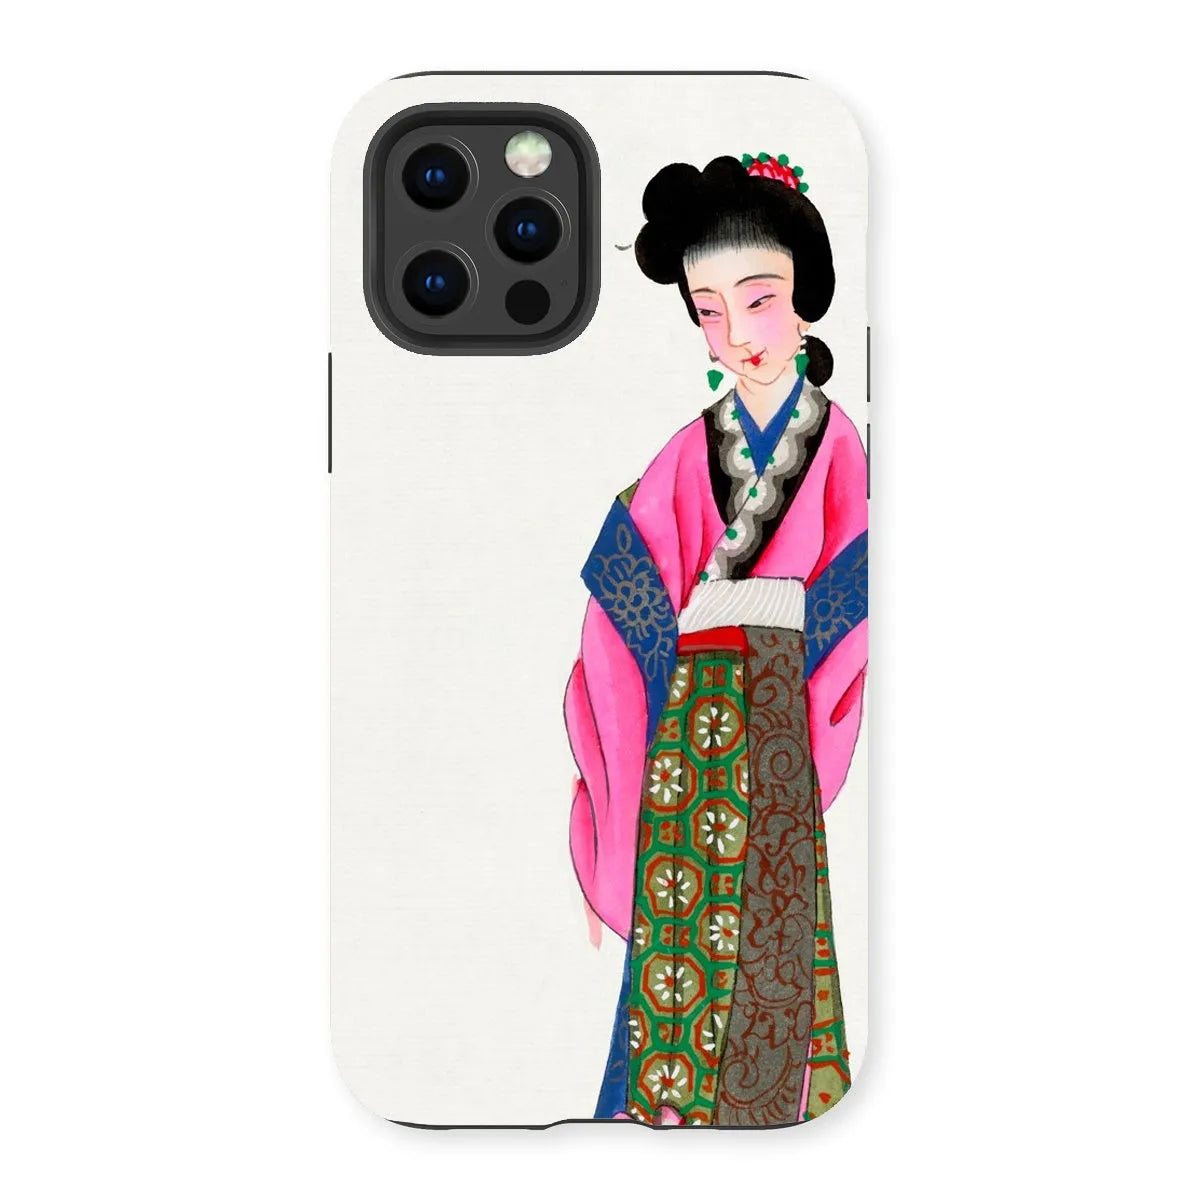 Noblewoman - Chinese Aesthetic Manchu Art Phone Case - Iphone 13 Pro / Matte - Mobile Phone Cases - Aesthetic Art